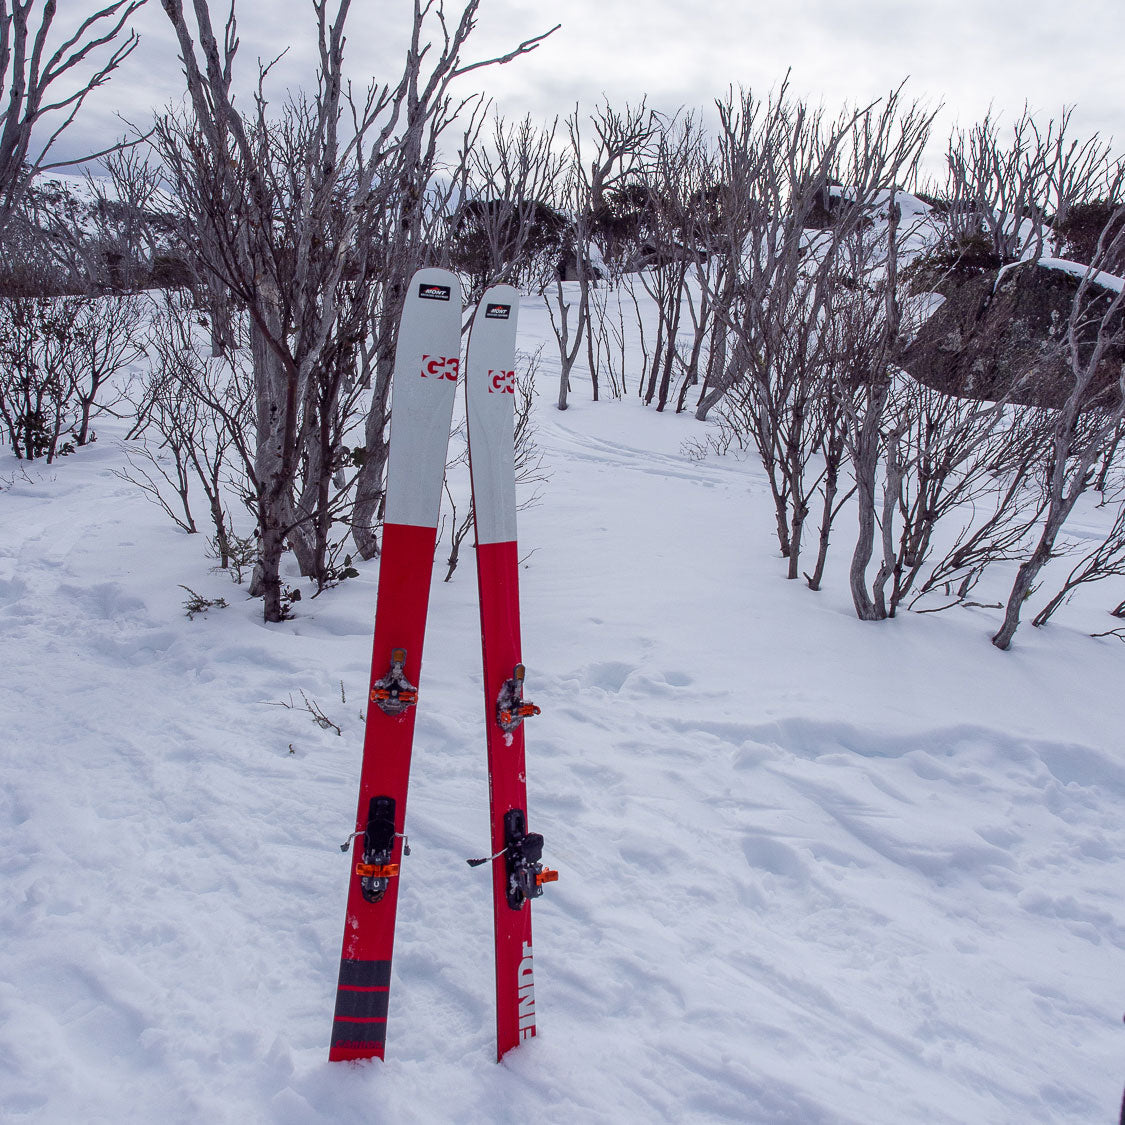 Review: G3 FINDr 94 Backcountry Skis